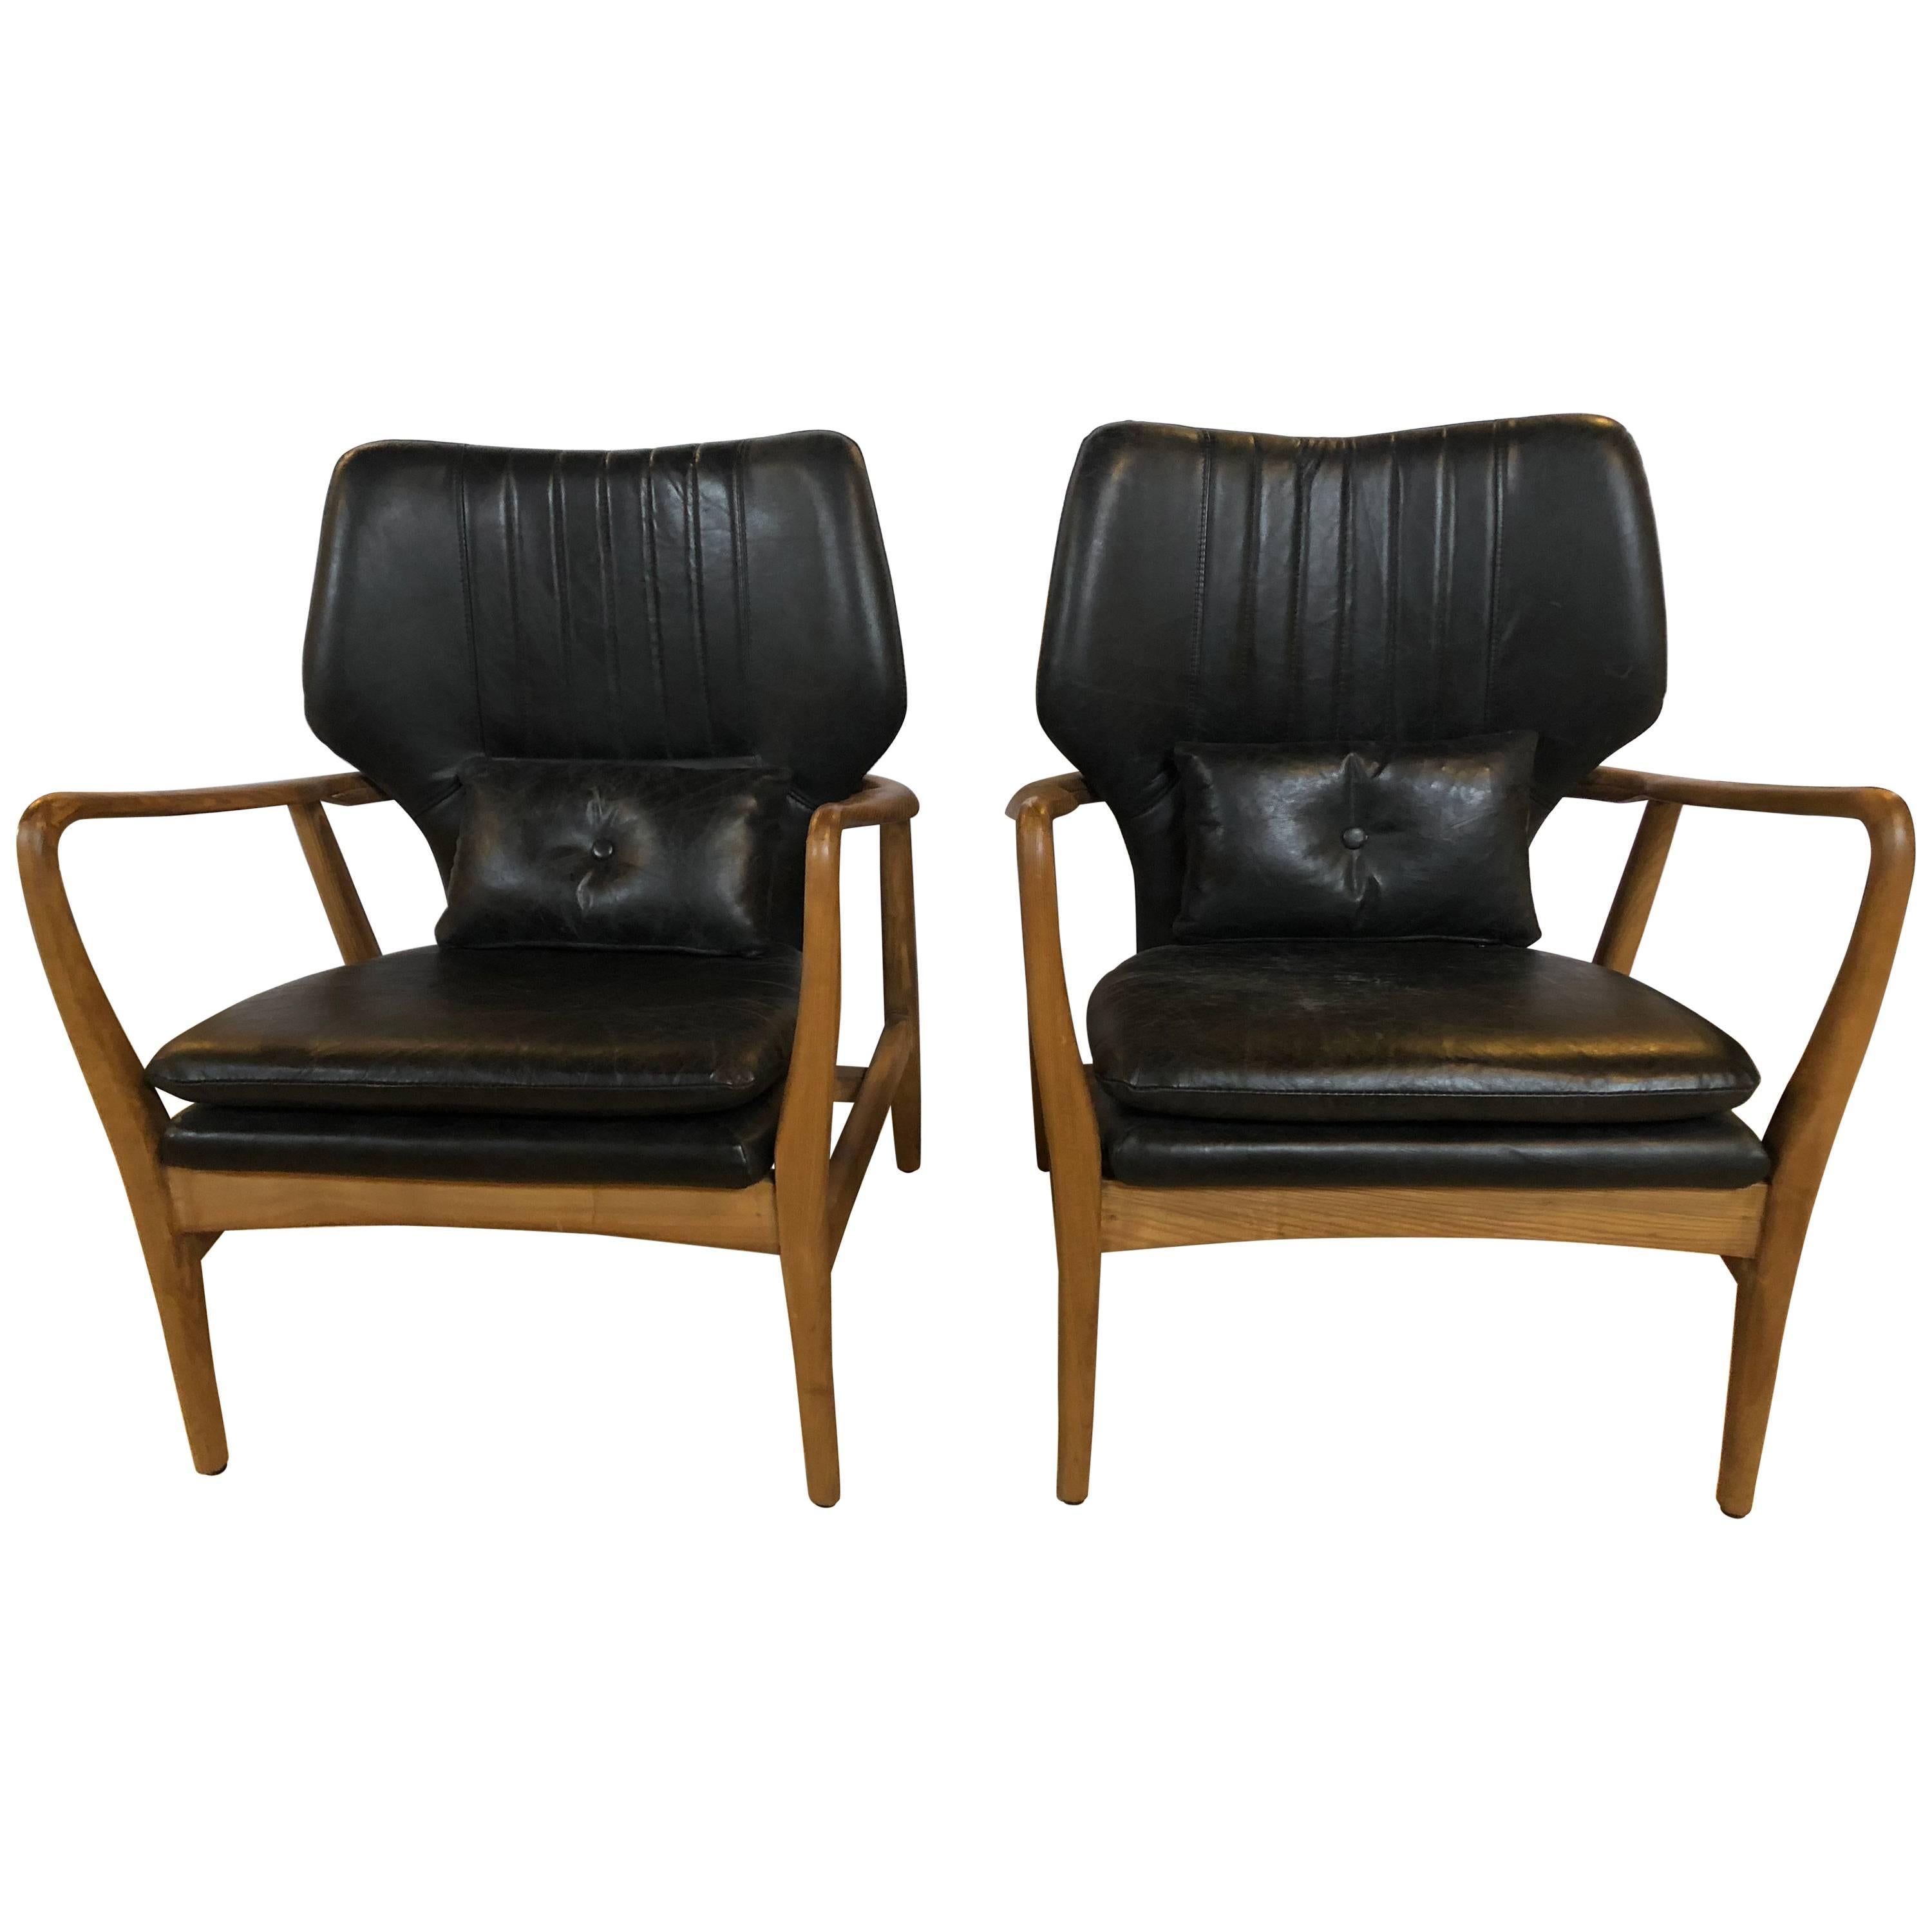 Pair of Mid Century Modern Style Arm Chairs with Black Leather Upholstery